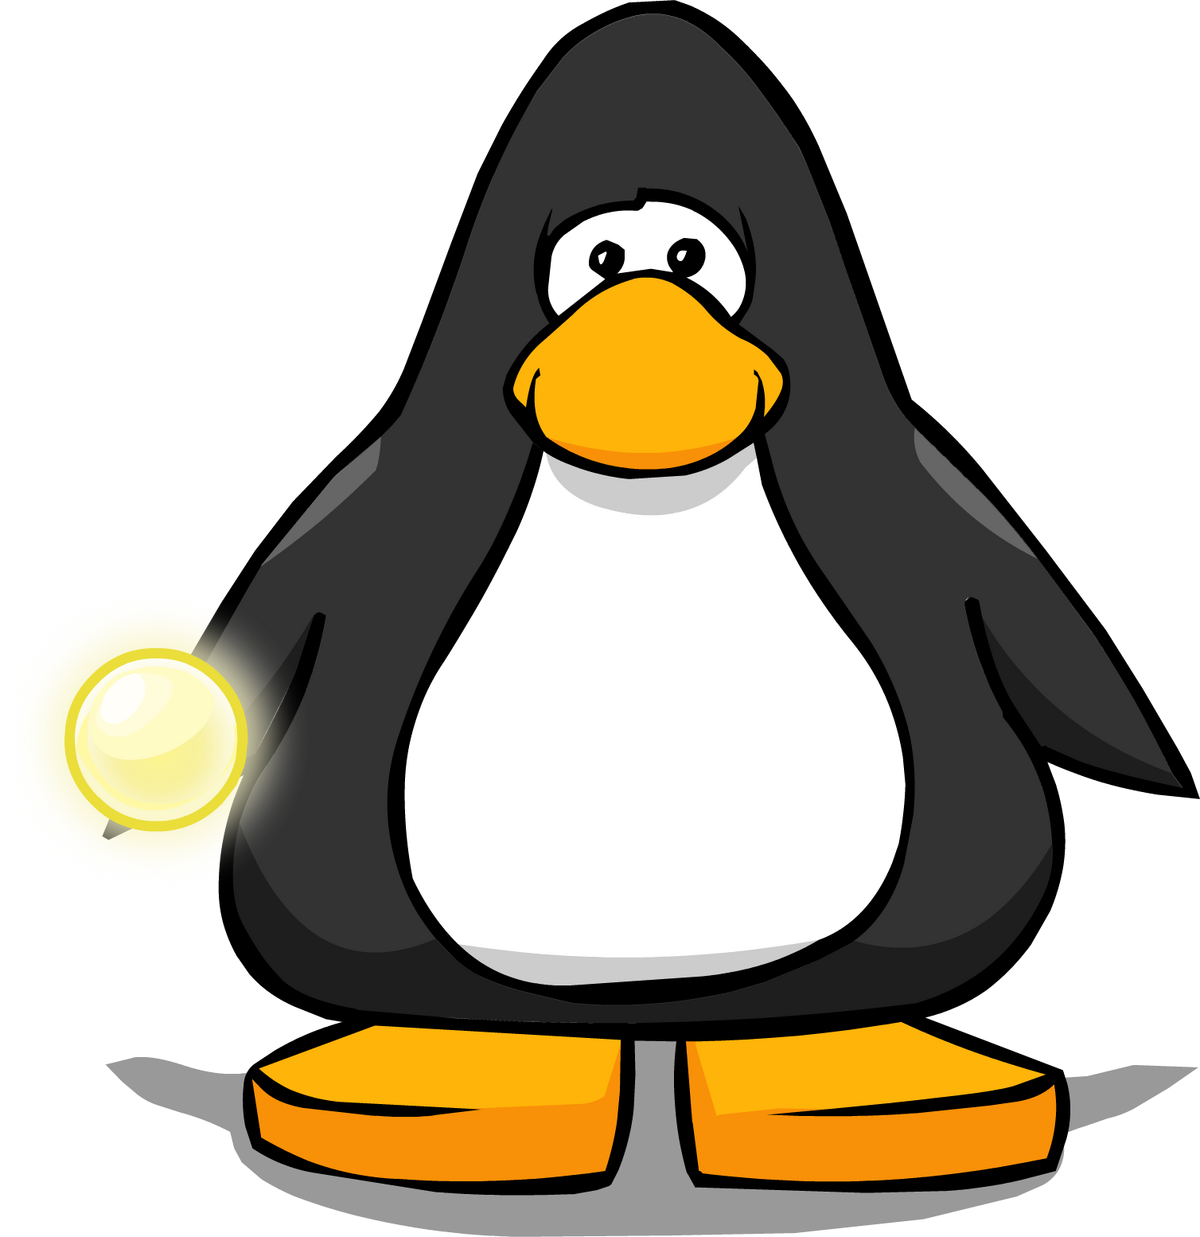 Memory Card Game, New Club Penguin Wiki